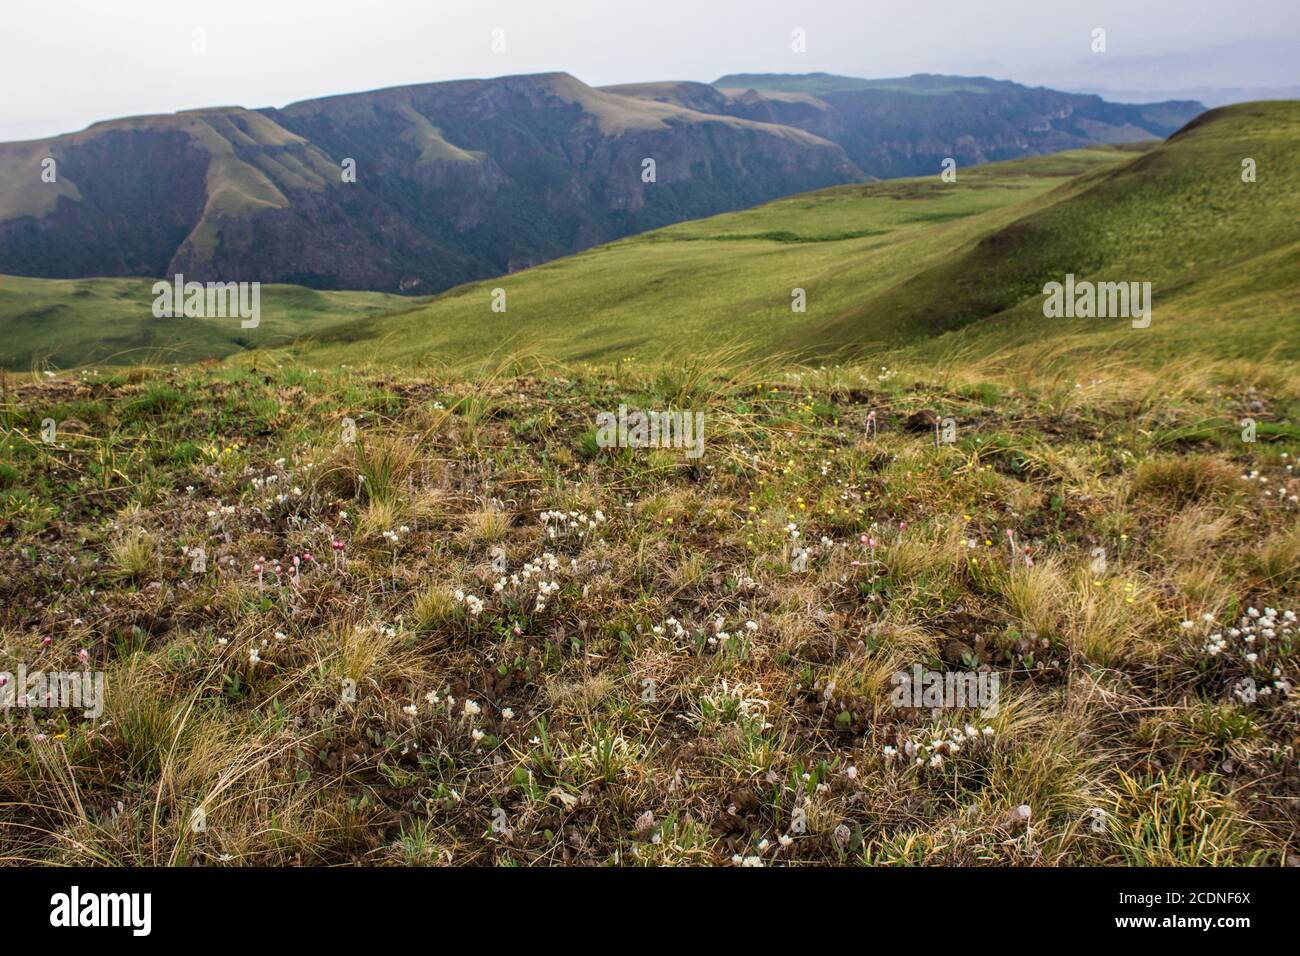 View over the grass covered slopes of the Drakensberg Mountains of South Africa with small white Alpine wildflowers in the foreground Stock Photo